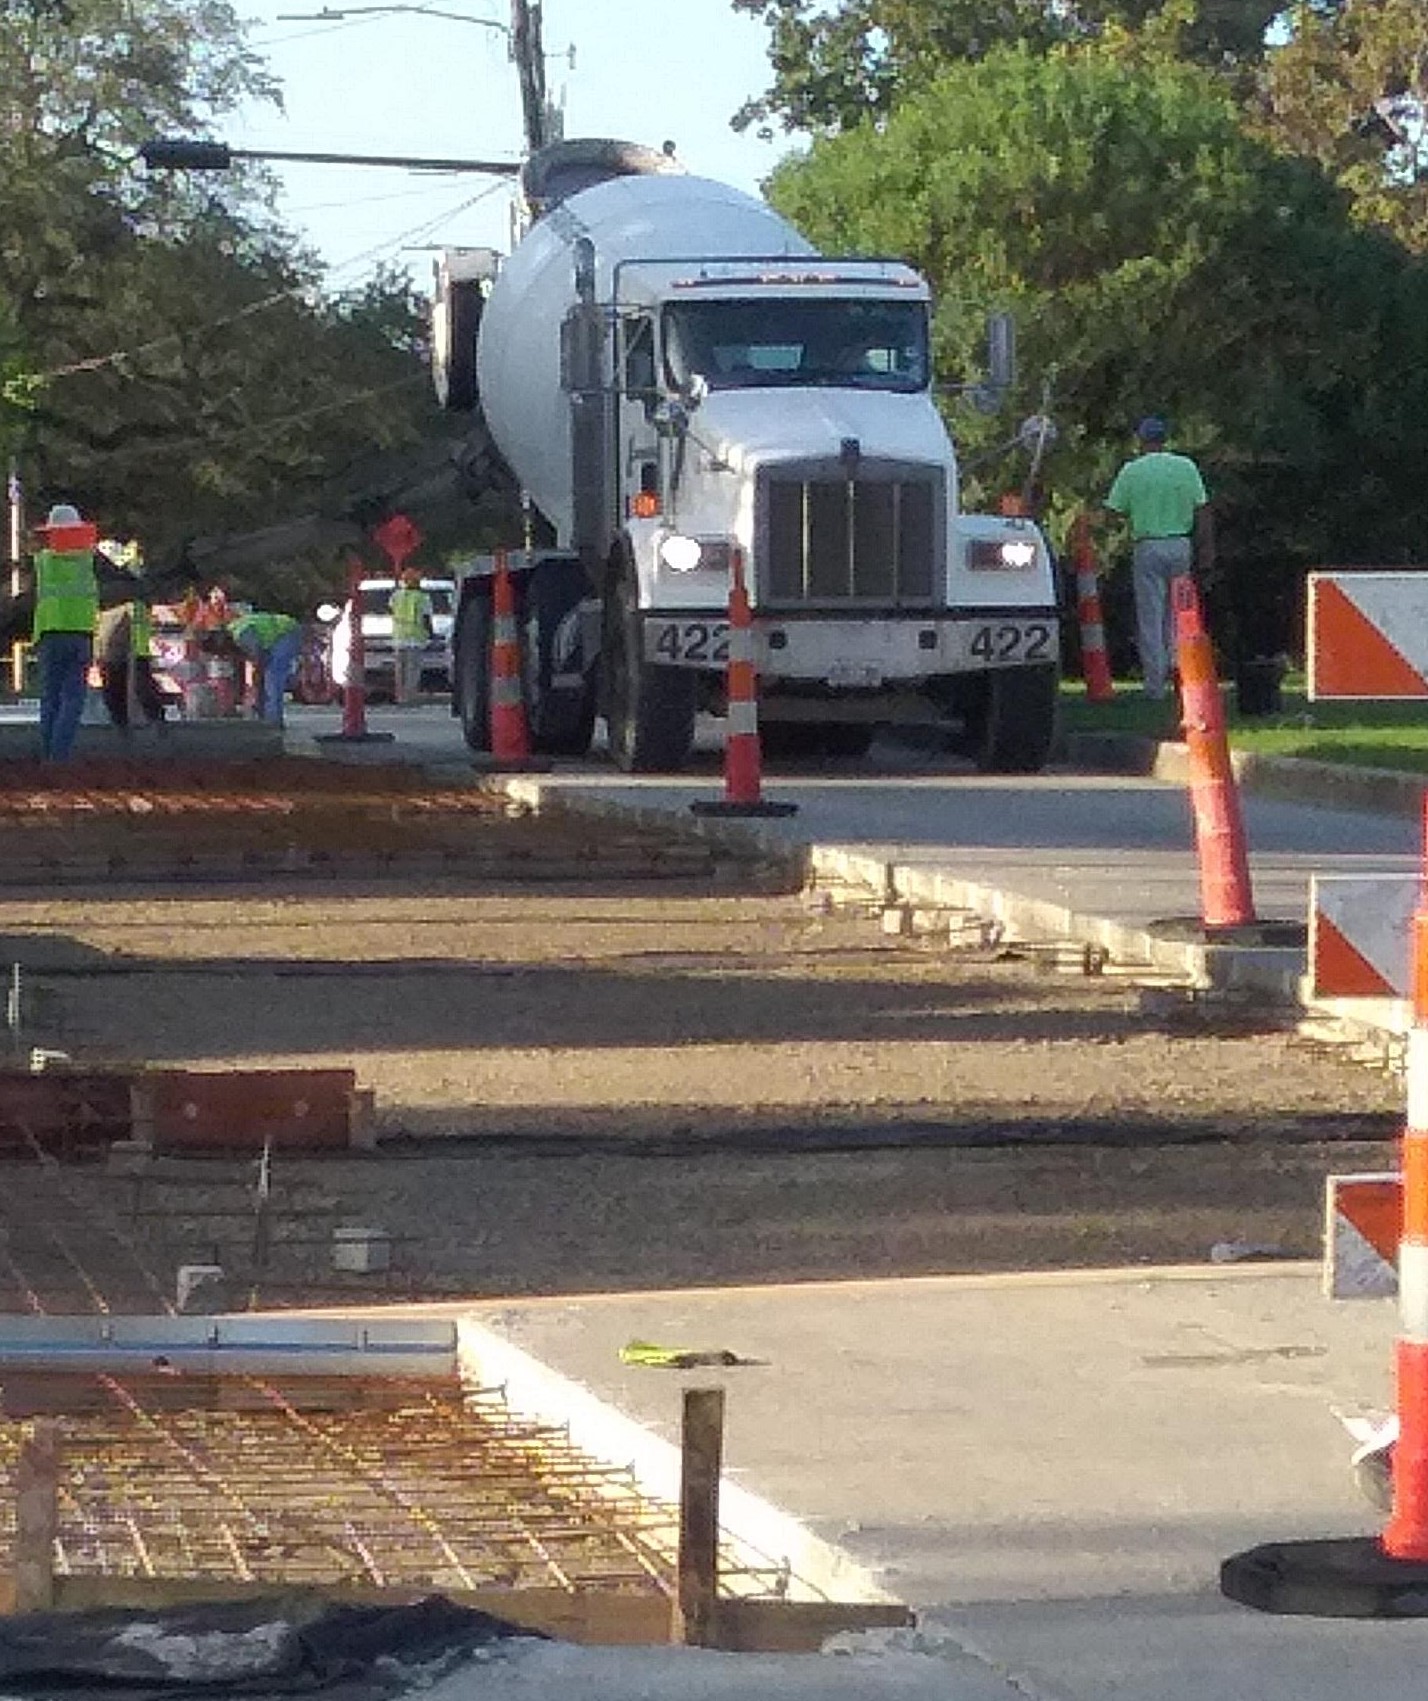 NAVARRE GROUP A CONTINUES TO MAKE PROGRESS WITH MORE PAVEMENT RESTORATION